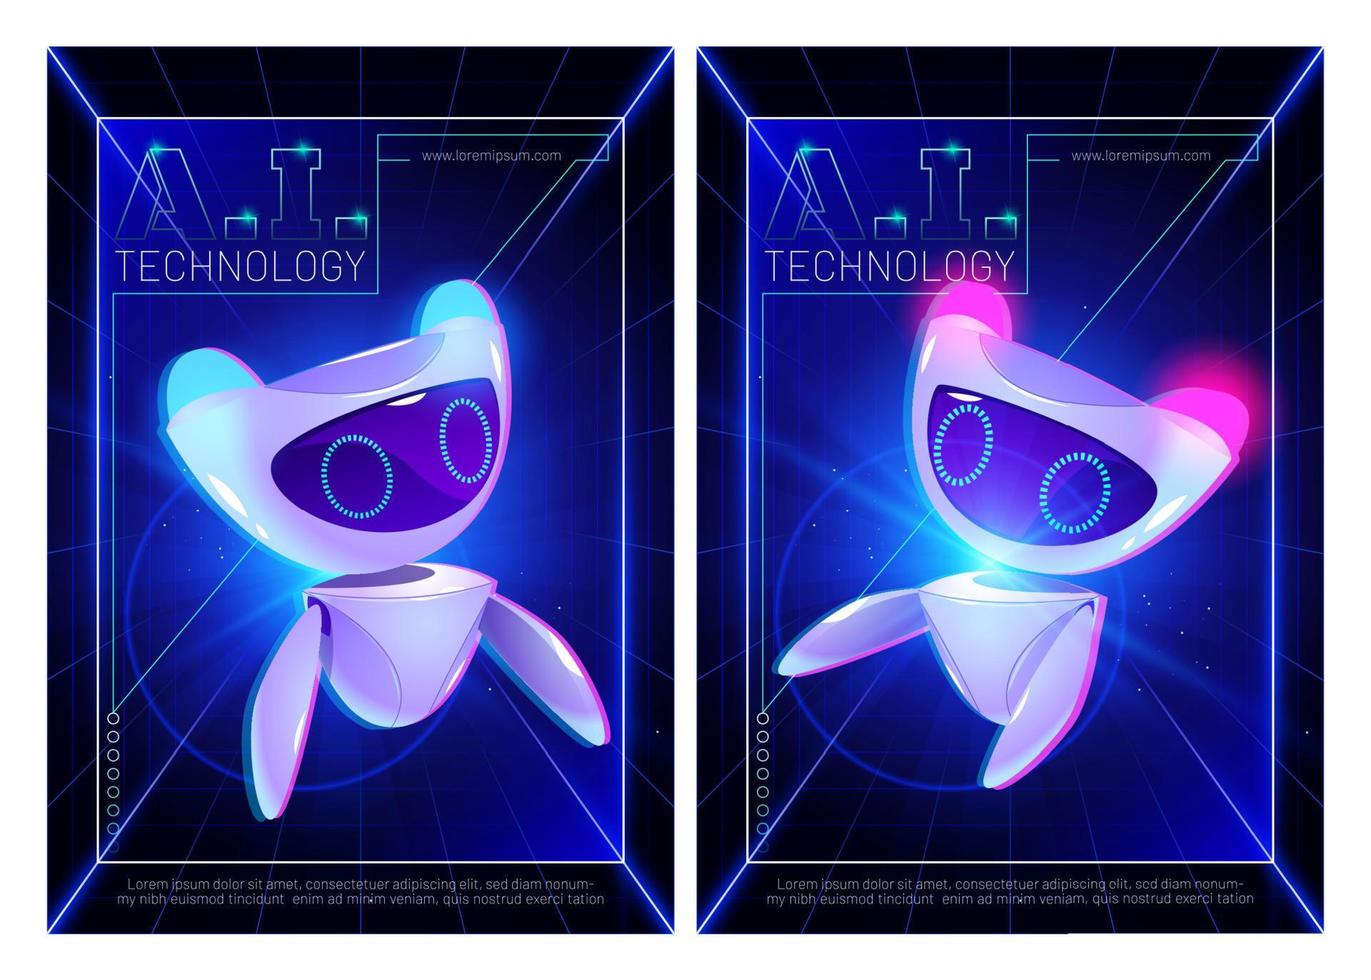 AI technology posters with cute robot character vector